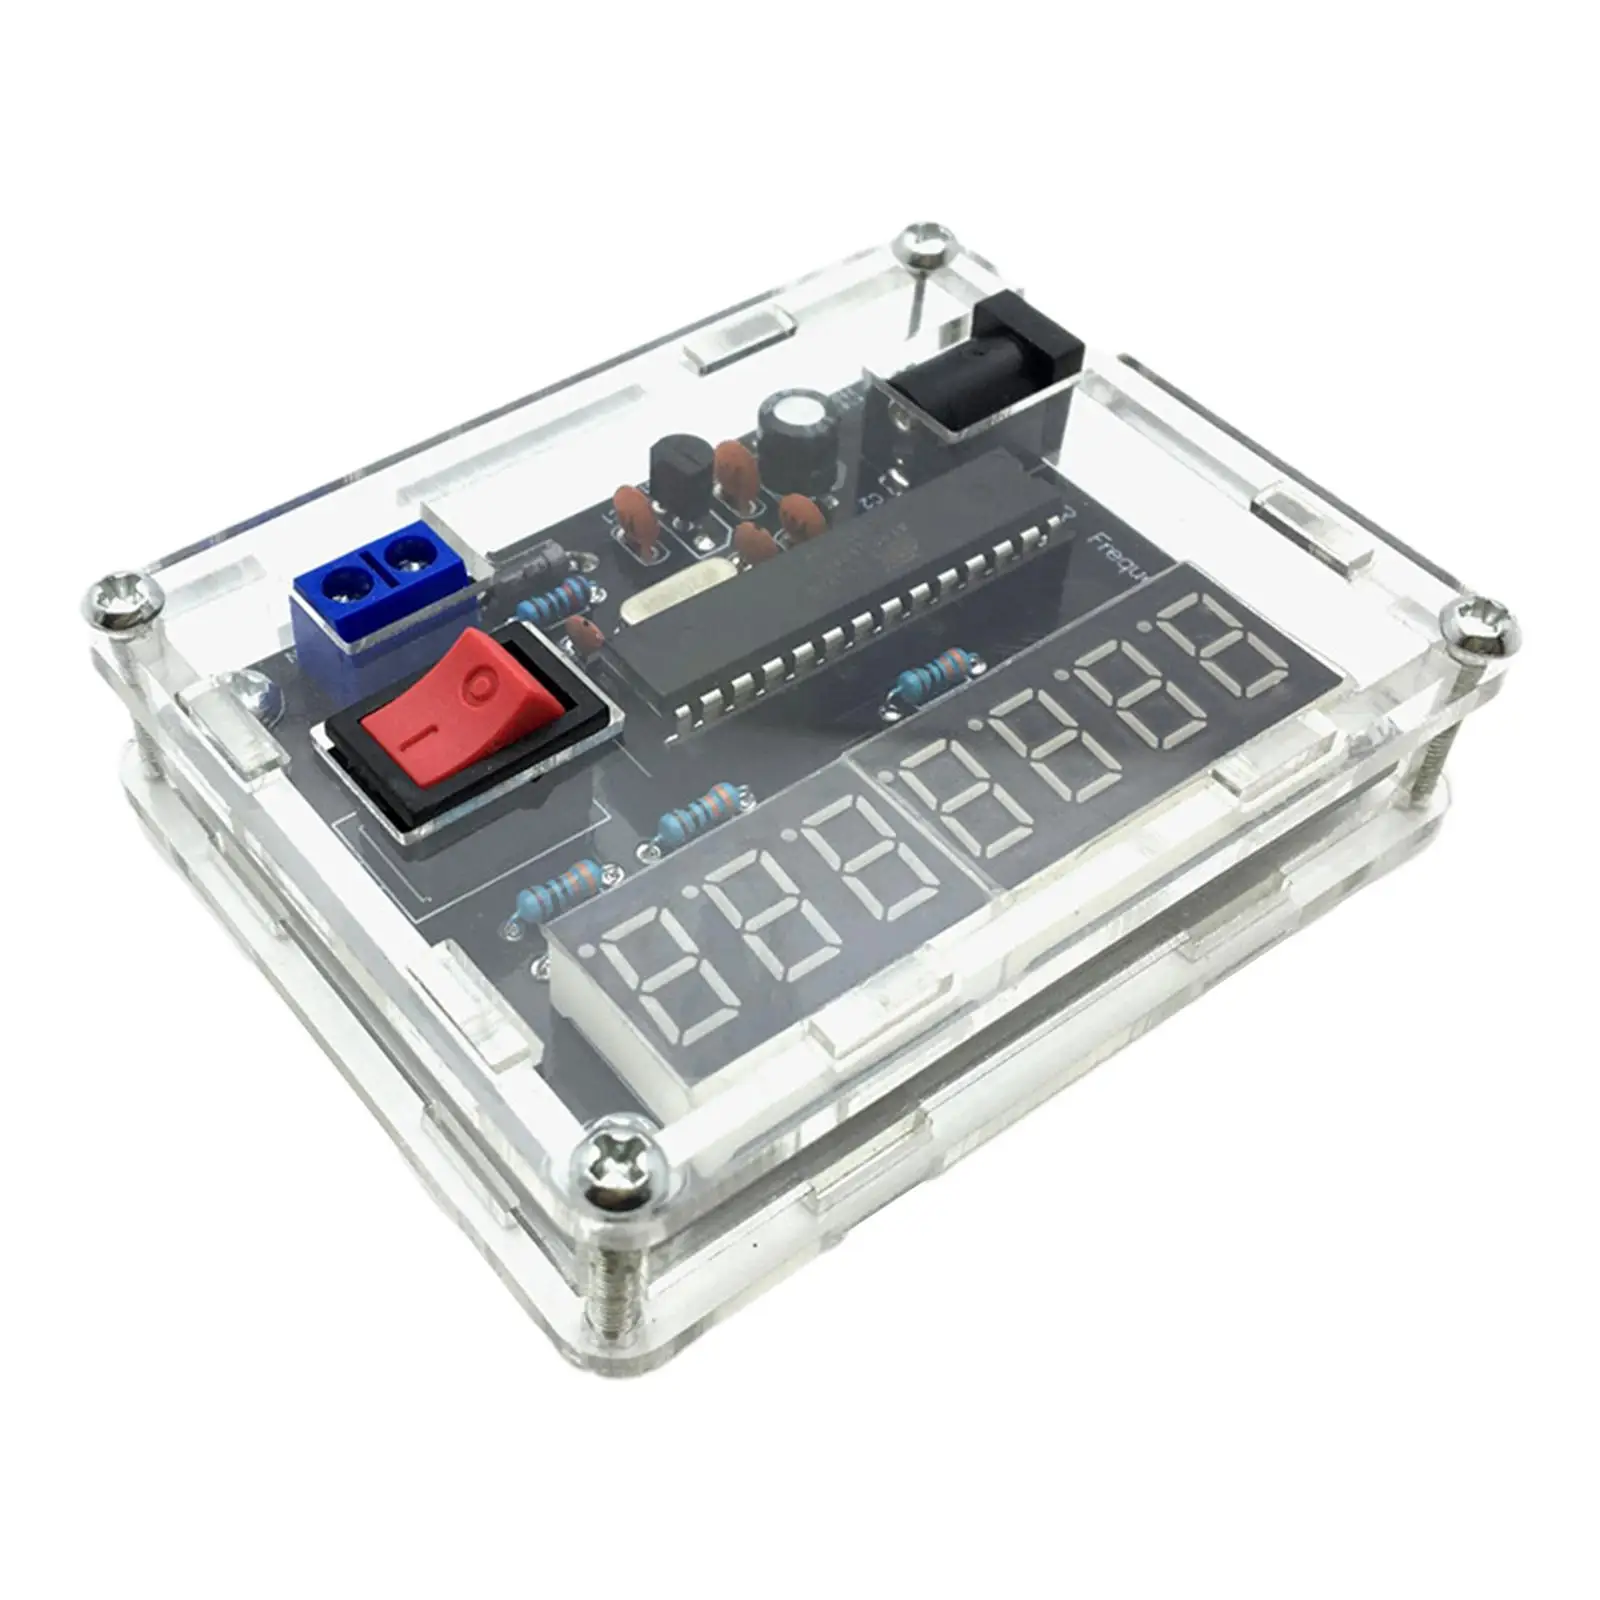 5-12V Frequency Tester with Acrylic Case 0.000 001Hz Resolution Measurement Oscillator Tester 10MHz